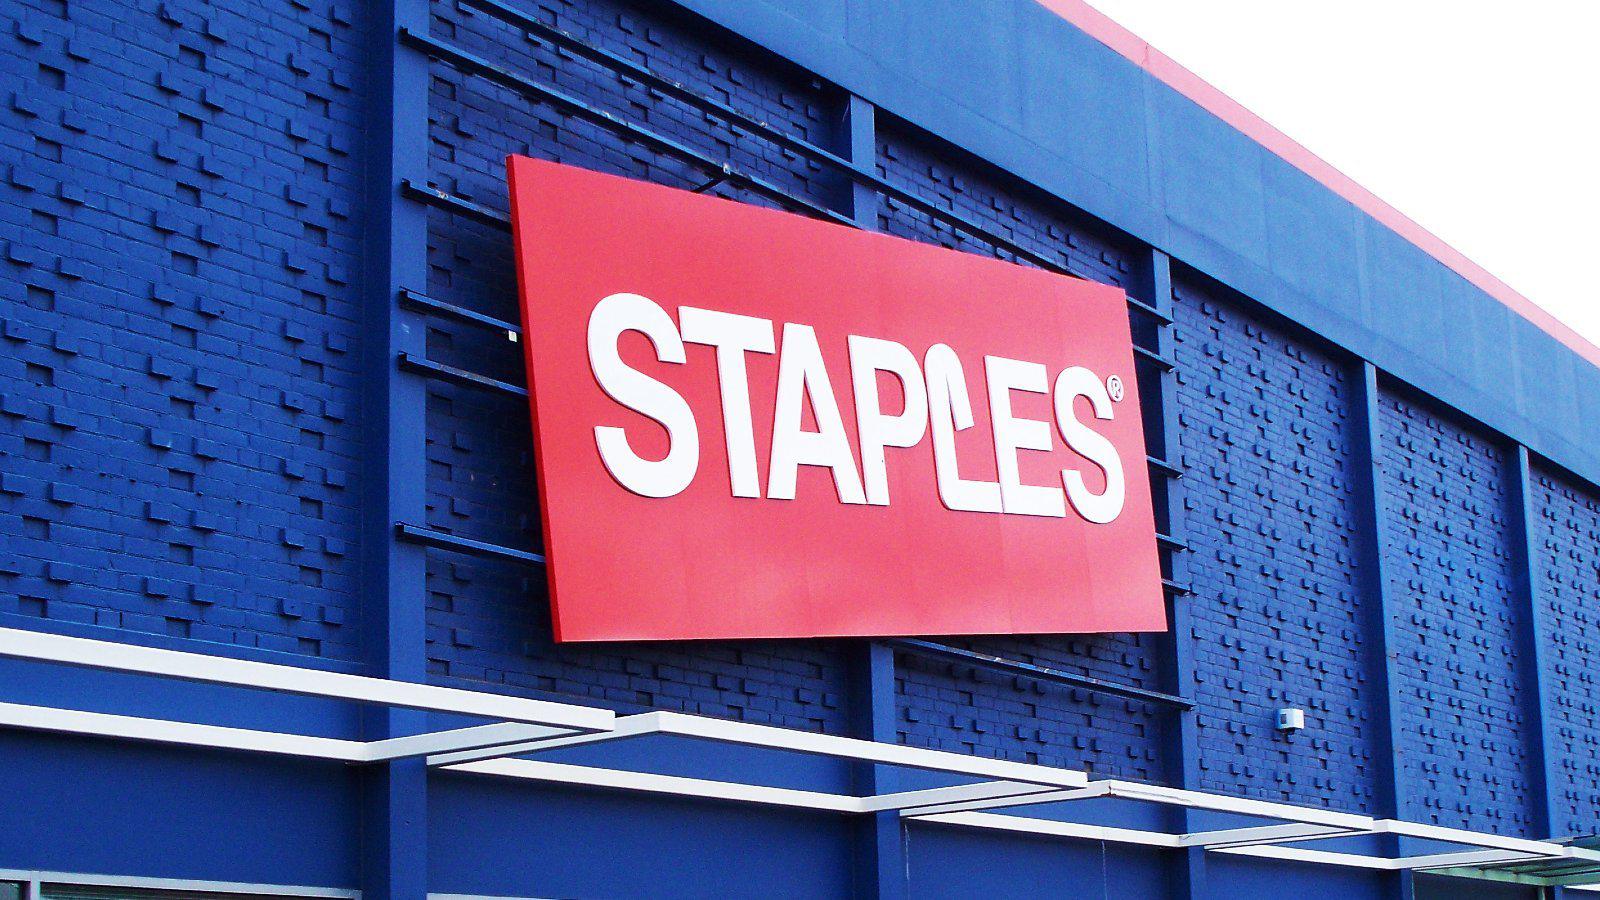 Staples confirms cyberattack behind service outages, delivery issues